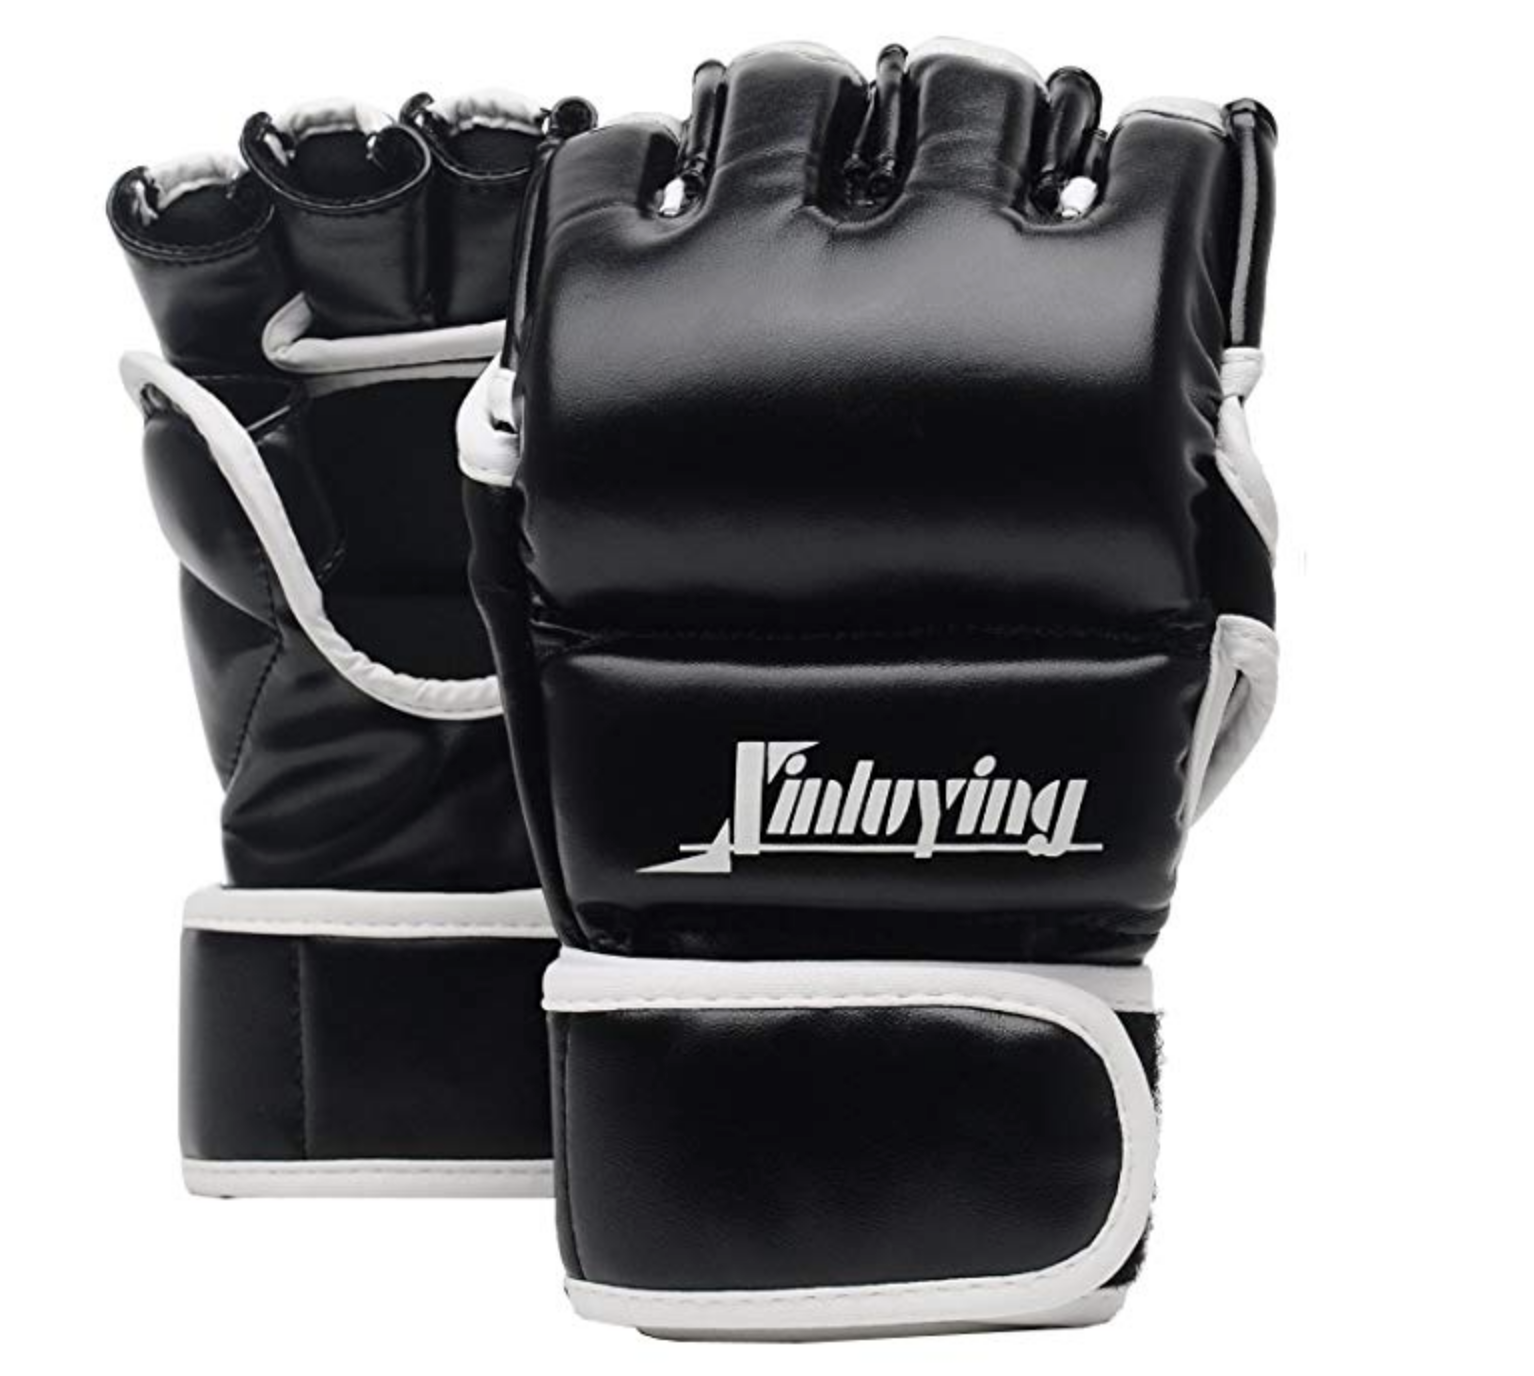 Brand New MMA Gloves (size Large)